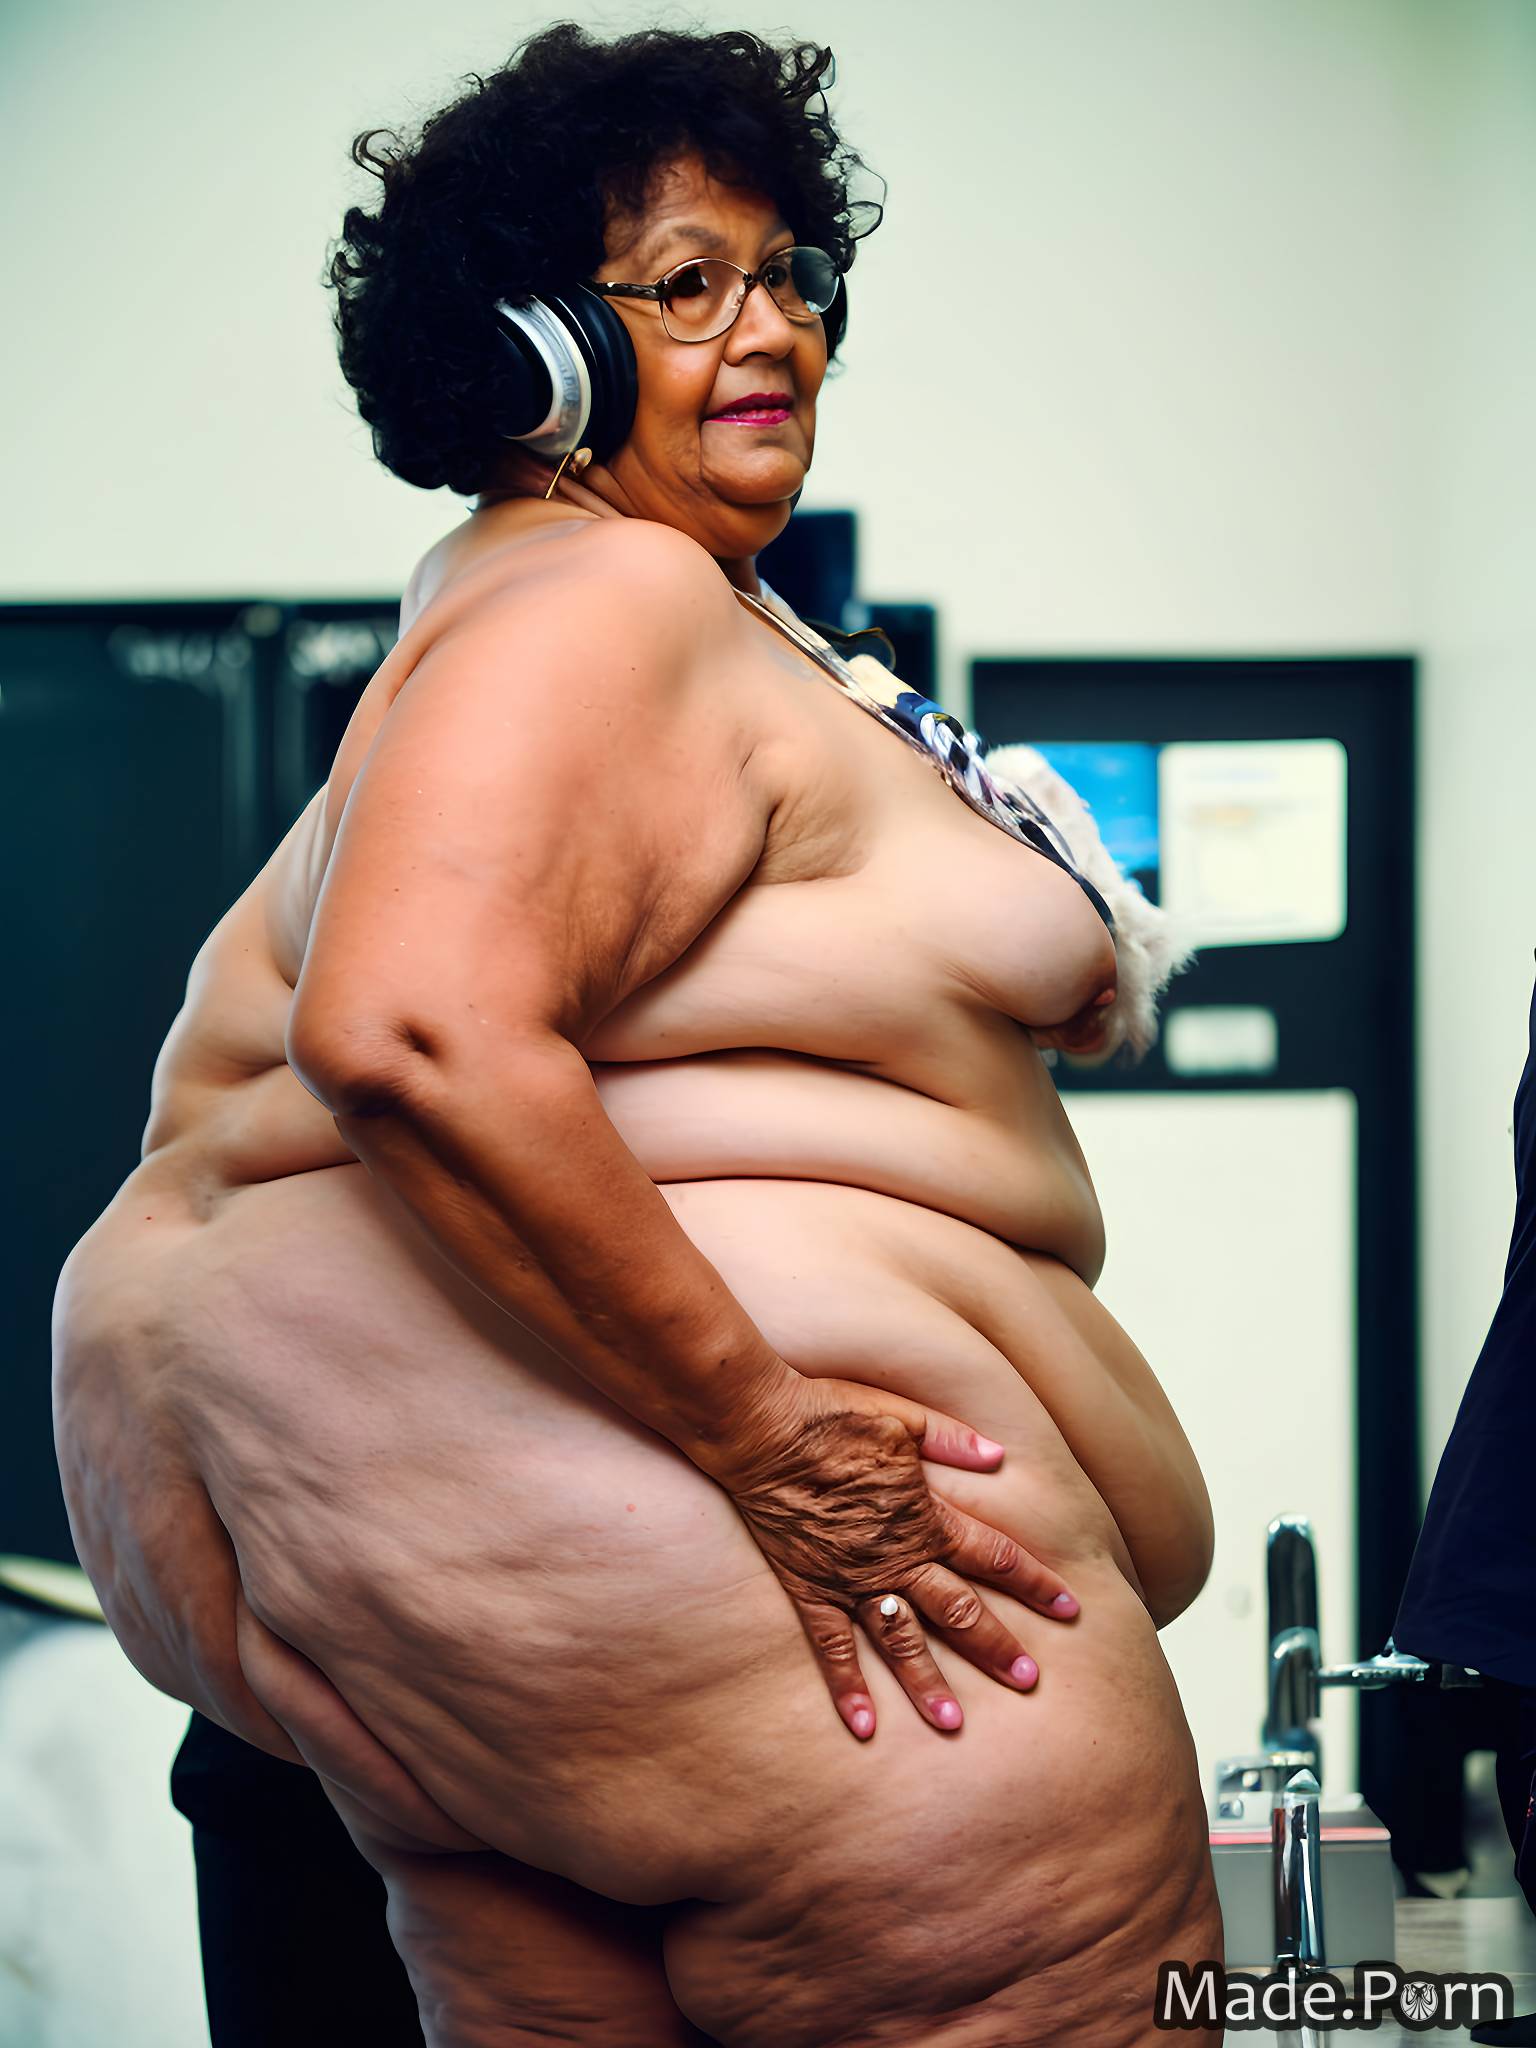 woman wild afro headphones nude tall sideview fat